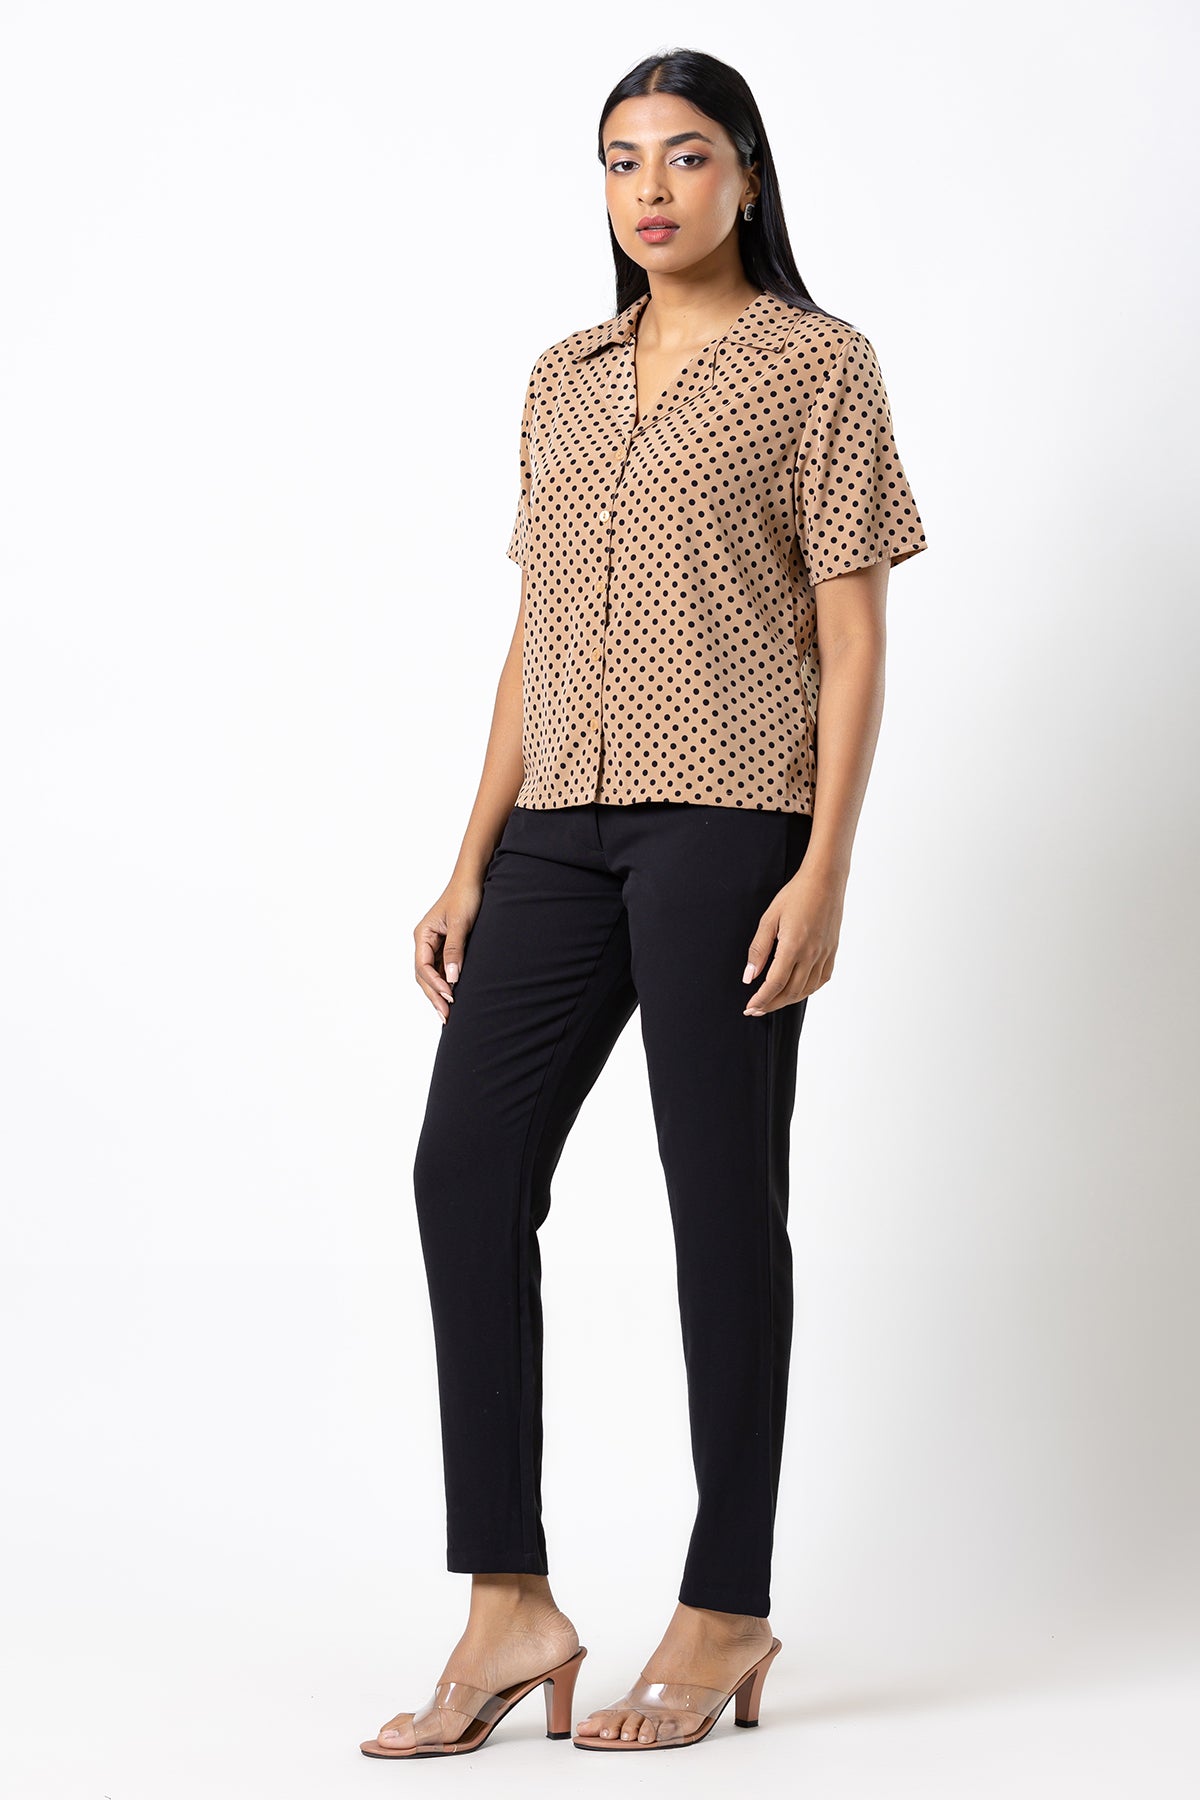 Envogue Women's Short Sleeve Dotted With Collar Office Top